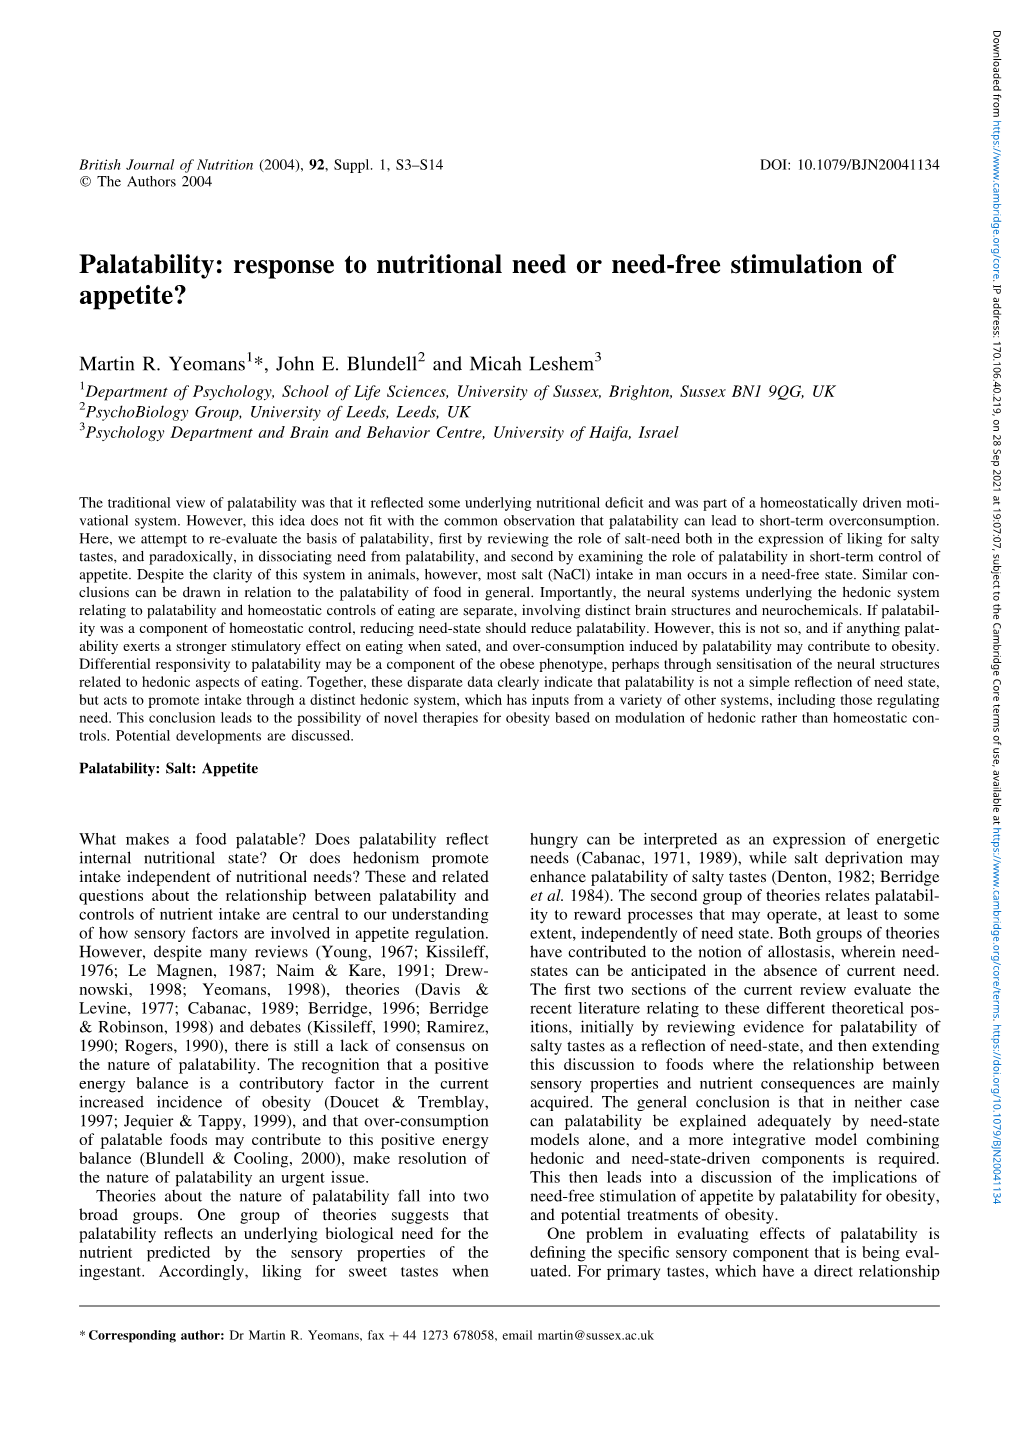 Palatability: Response to Nutritional Need Or Need-Free Stimulation Of